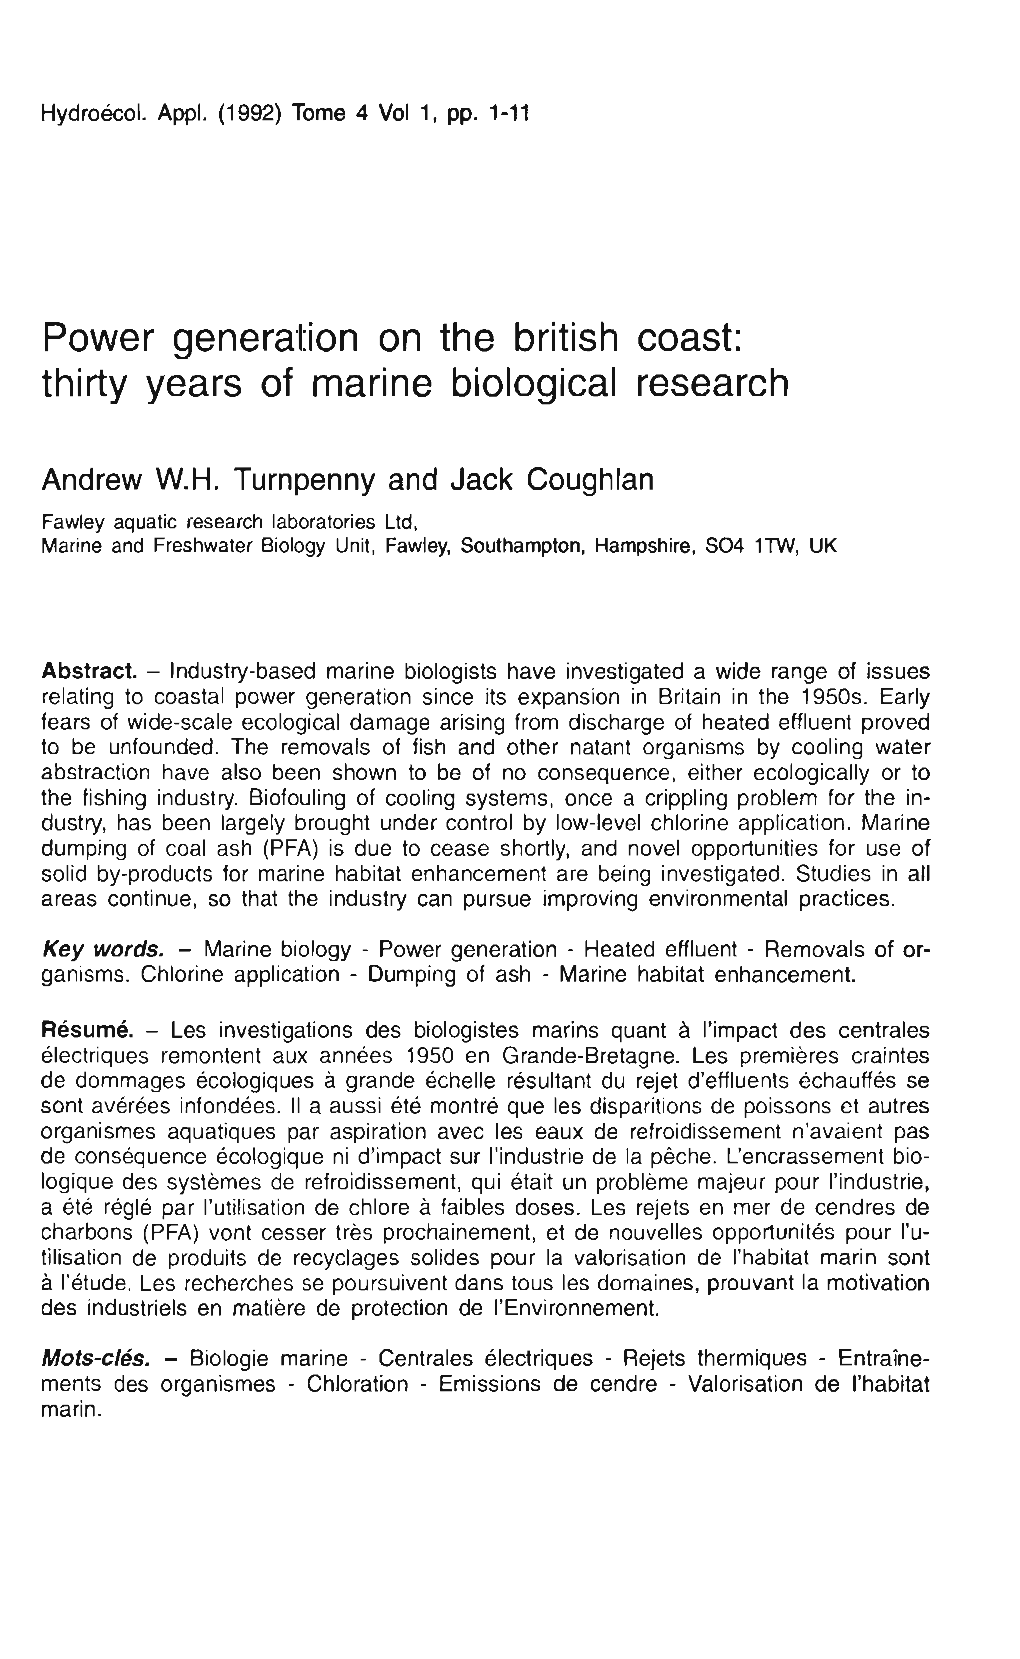 Power Generation on the British Coast: Thirty Years of Marine Biological Research